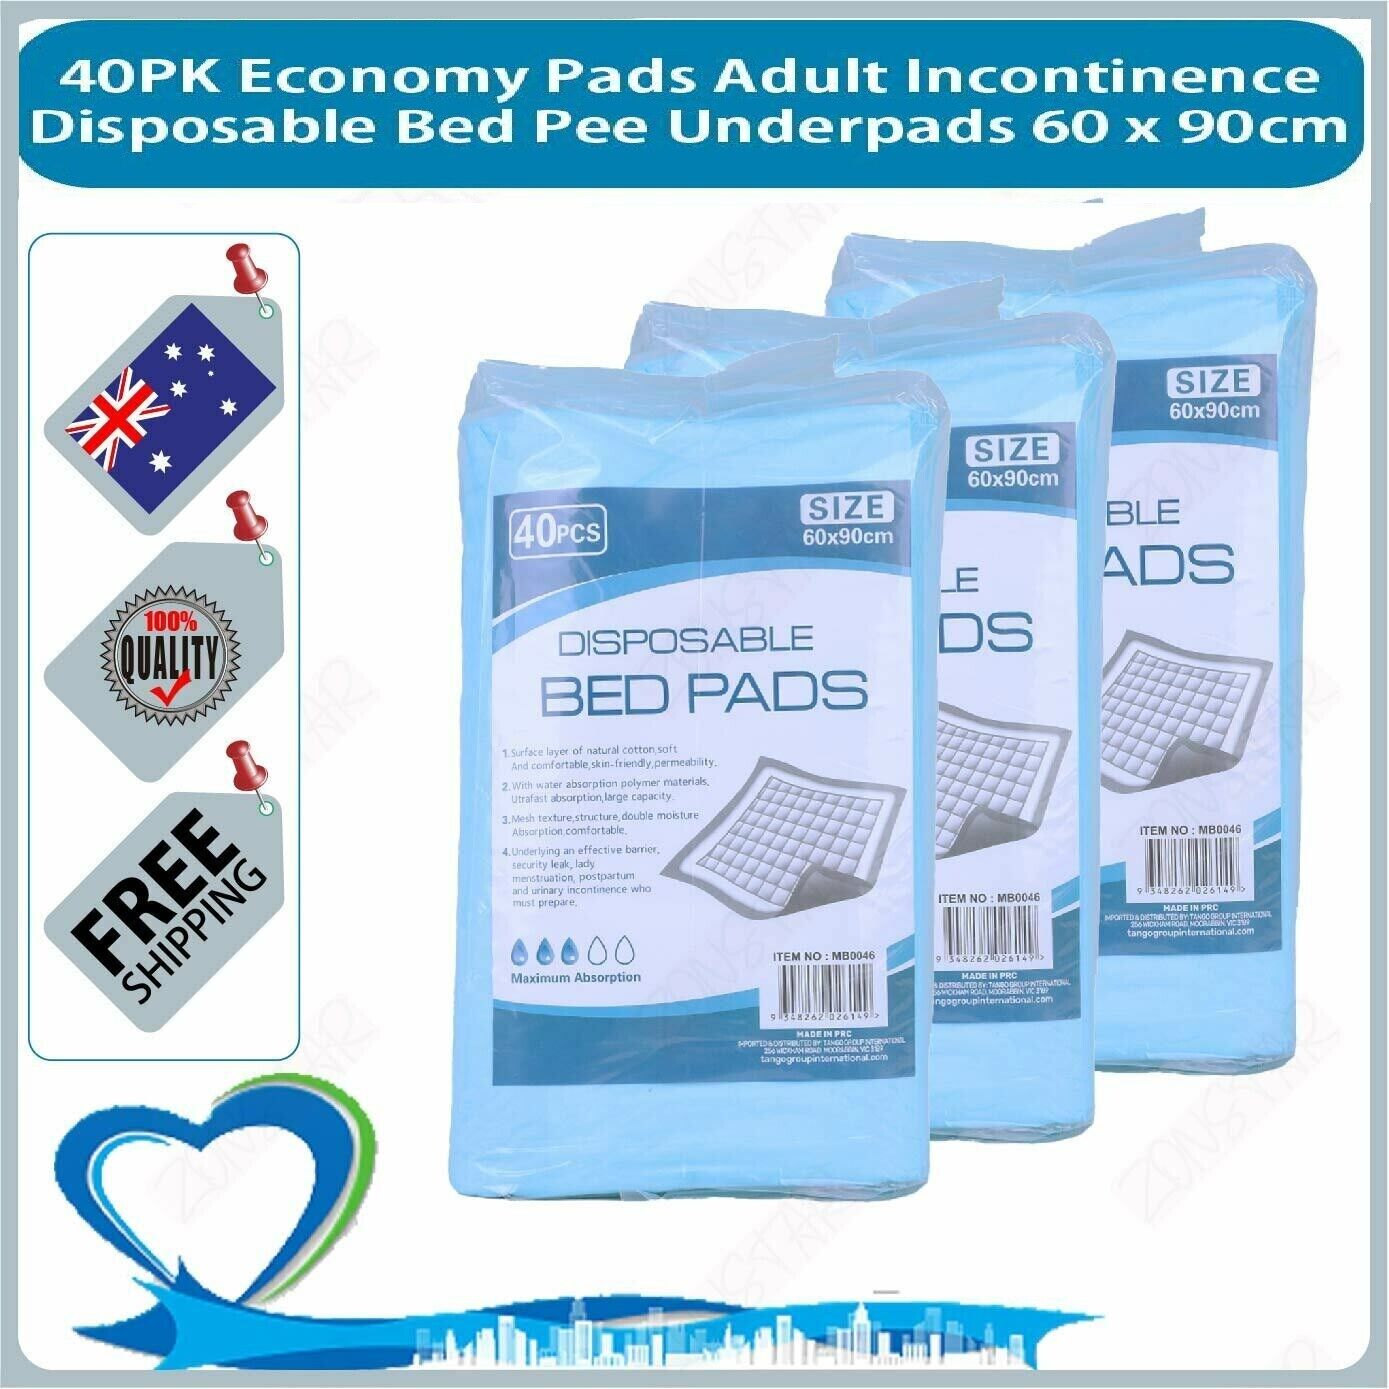 40PK Economy Pads Adult Incontinence Pads Disposable Bed Pee Underpads 60 x 90cm